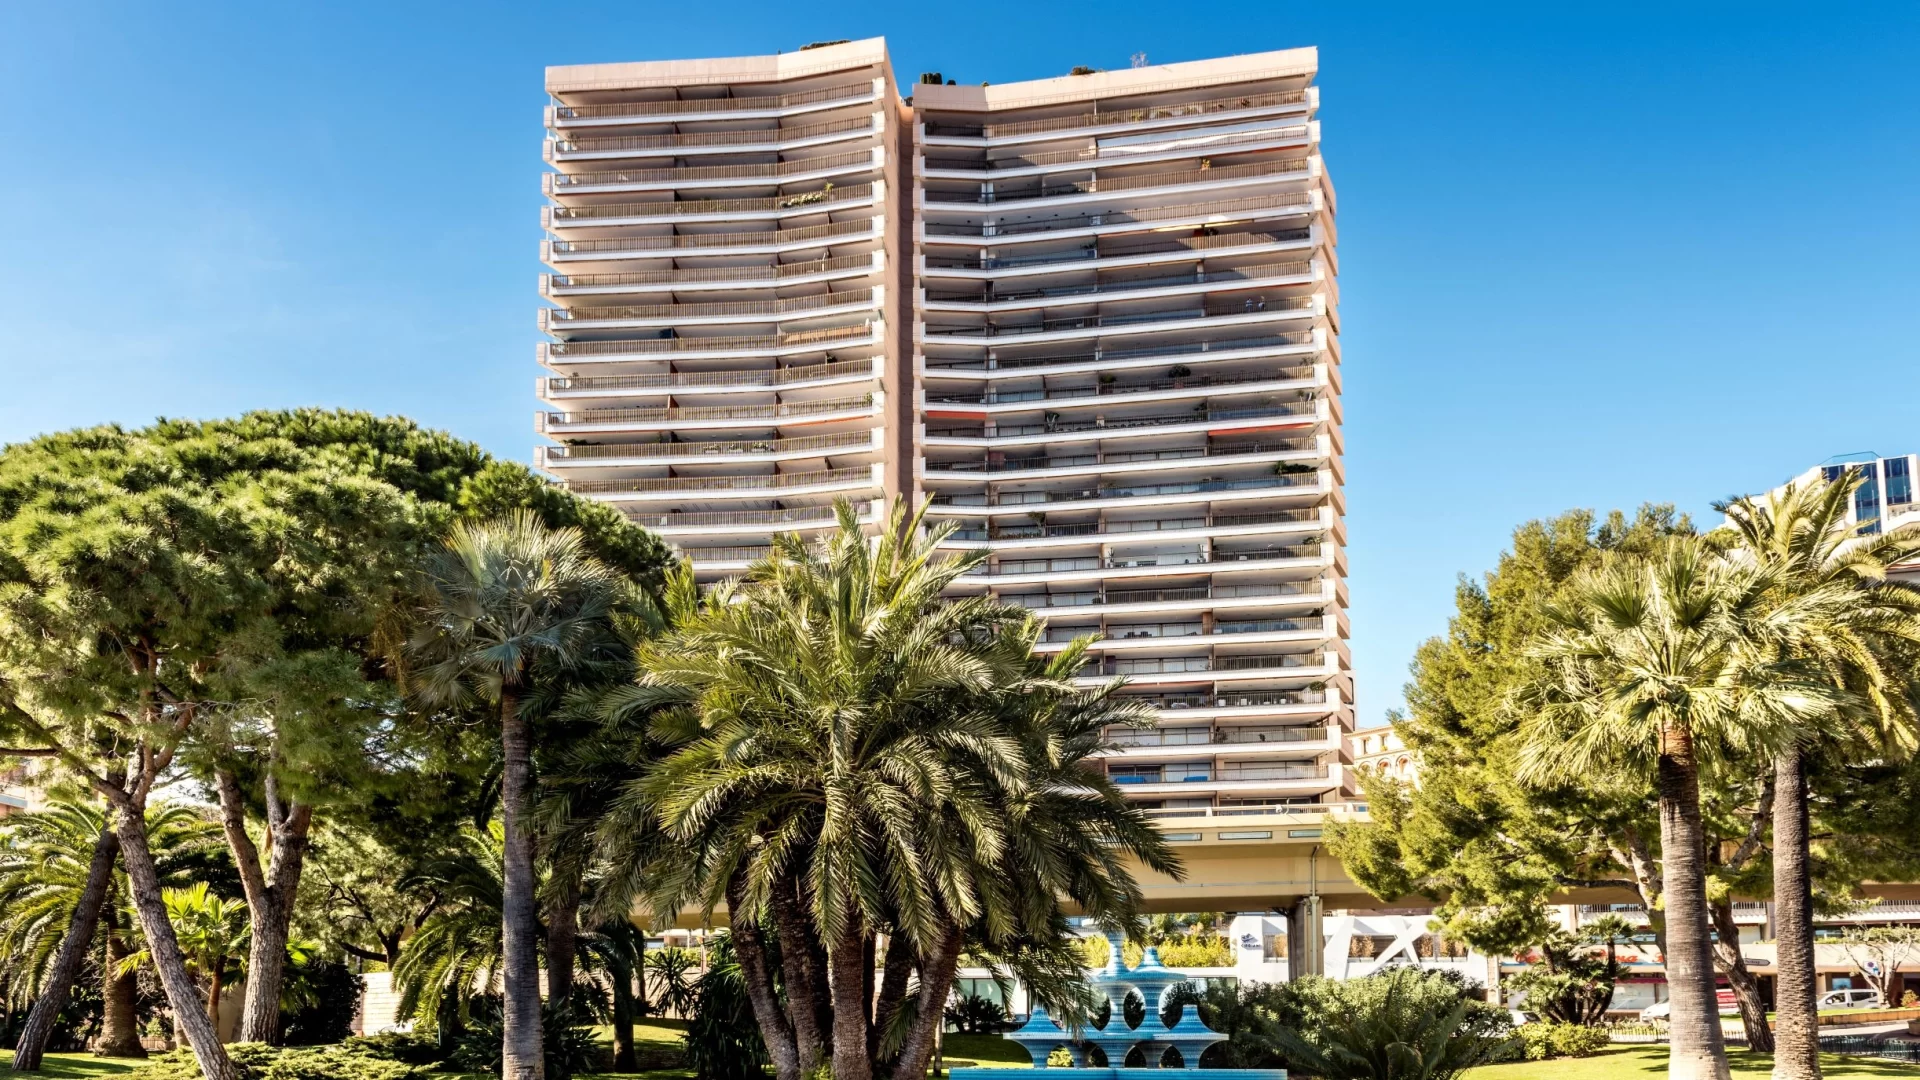 Le Mirabeau Residence located the Carré d'Or area of Monte Carlo, Monaco. The photo shows the two towers of the building. Photo by Baldo Realty Group